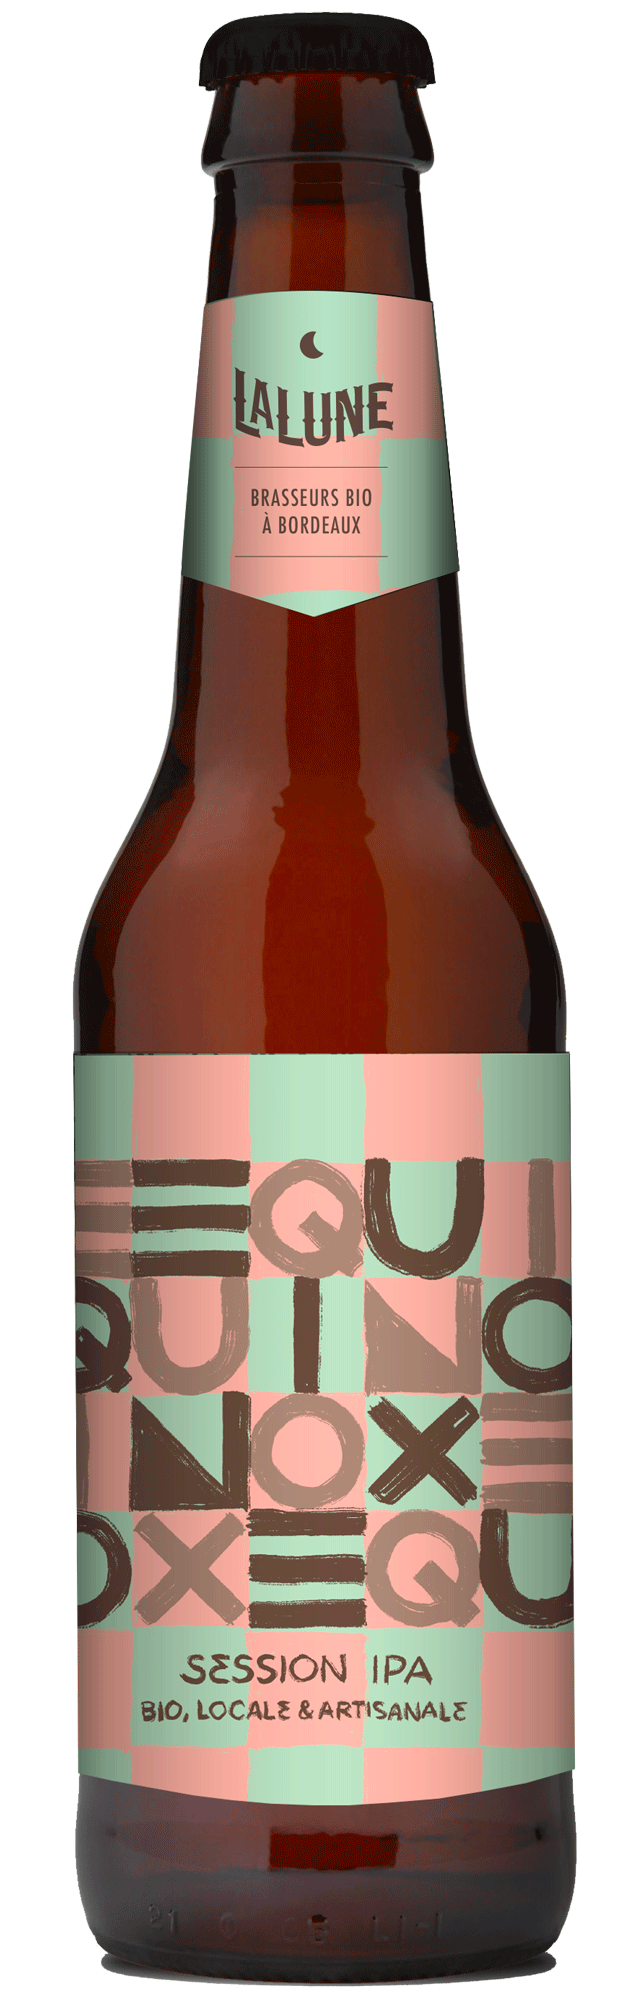 bouteille equinoxe session ipa